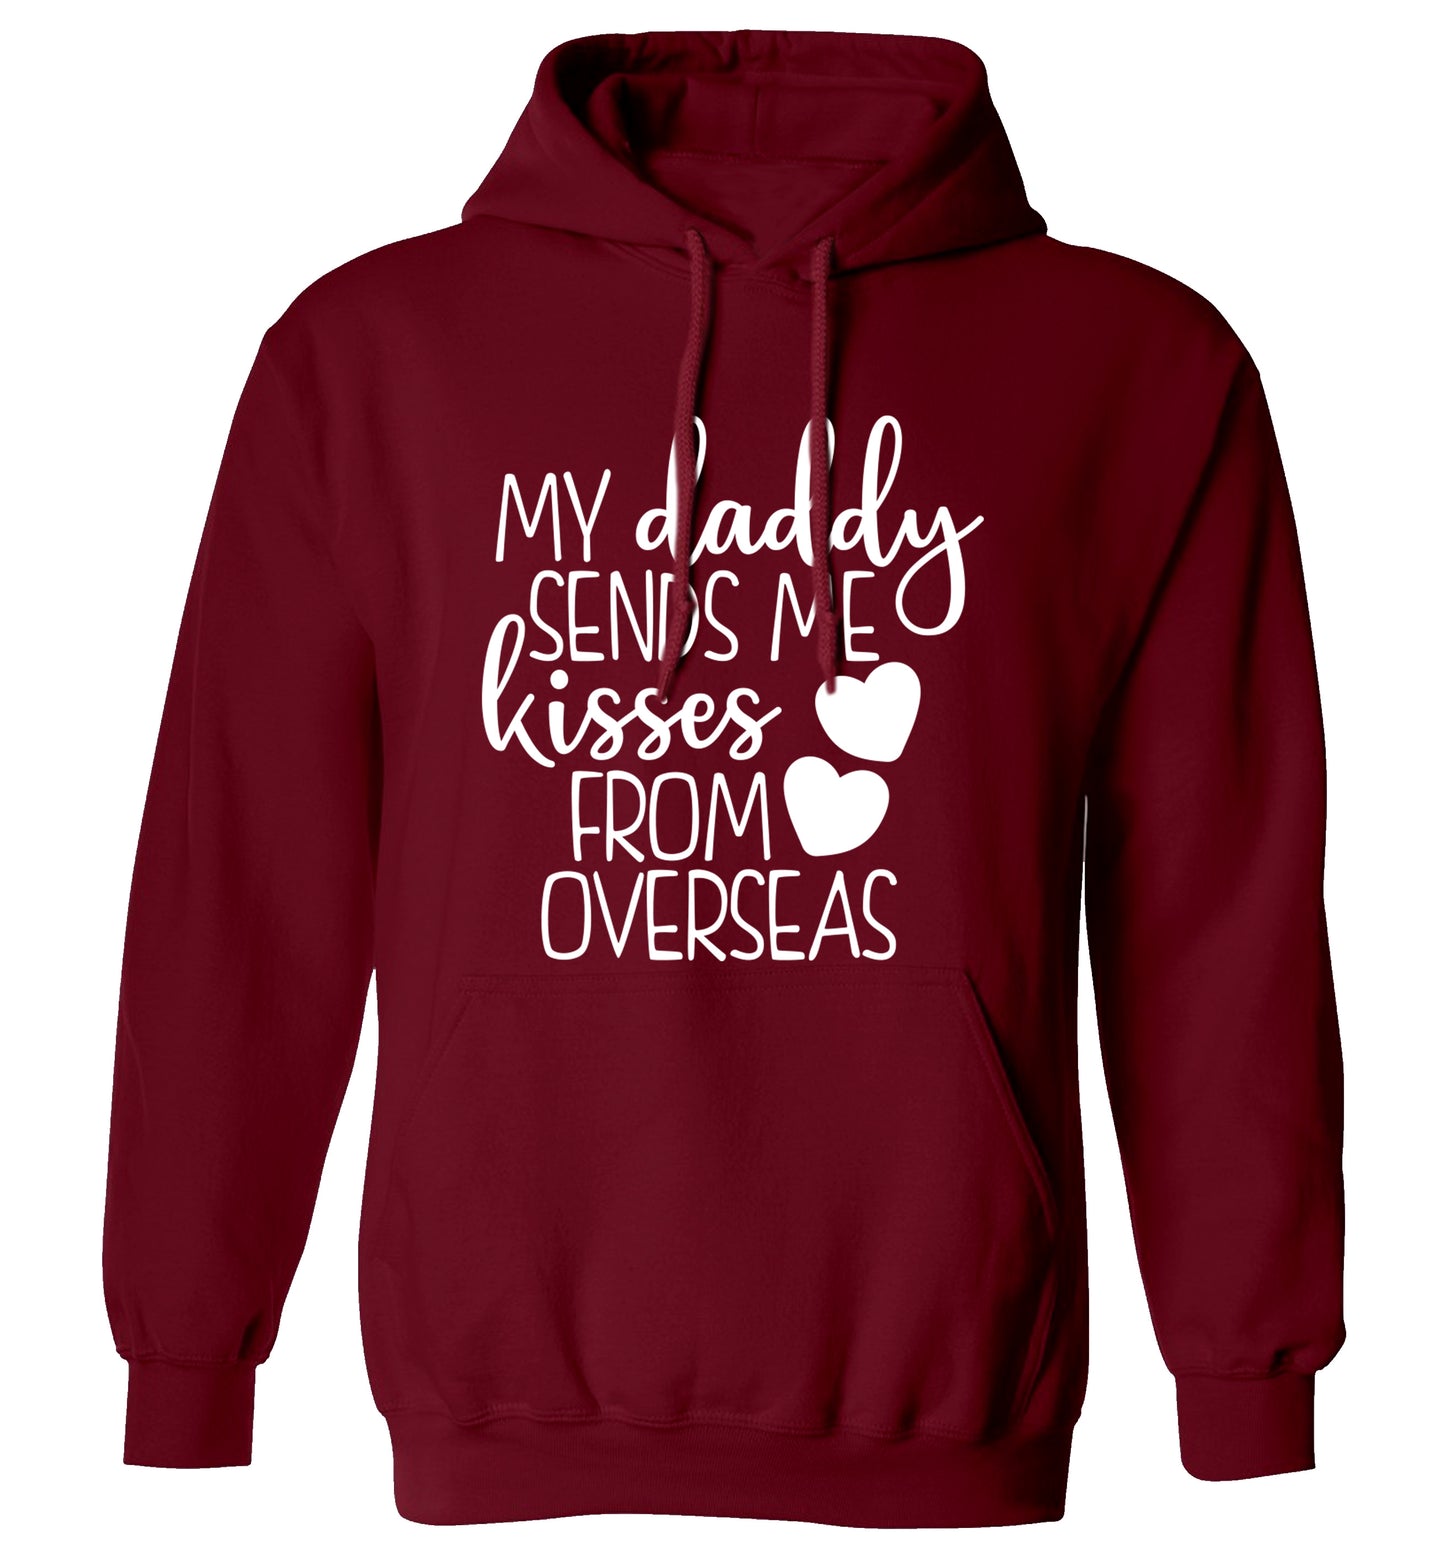 My daddy sends me kisses from overseas adults unisex maroon hoodie 2XL